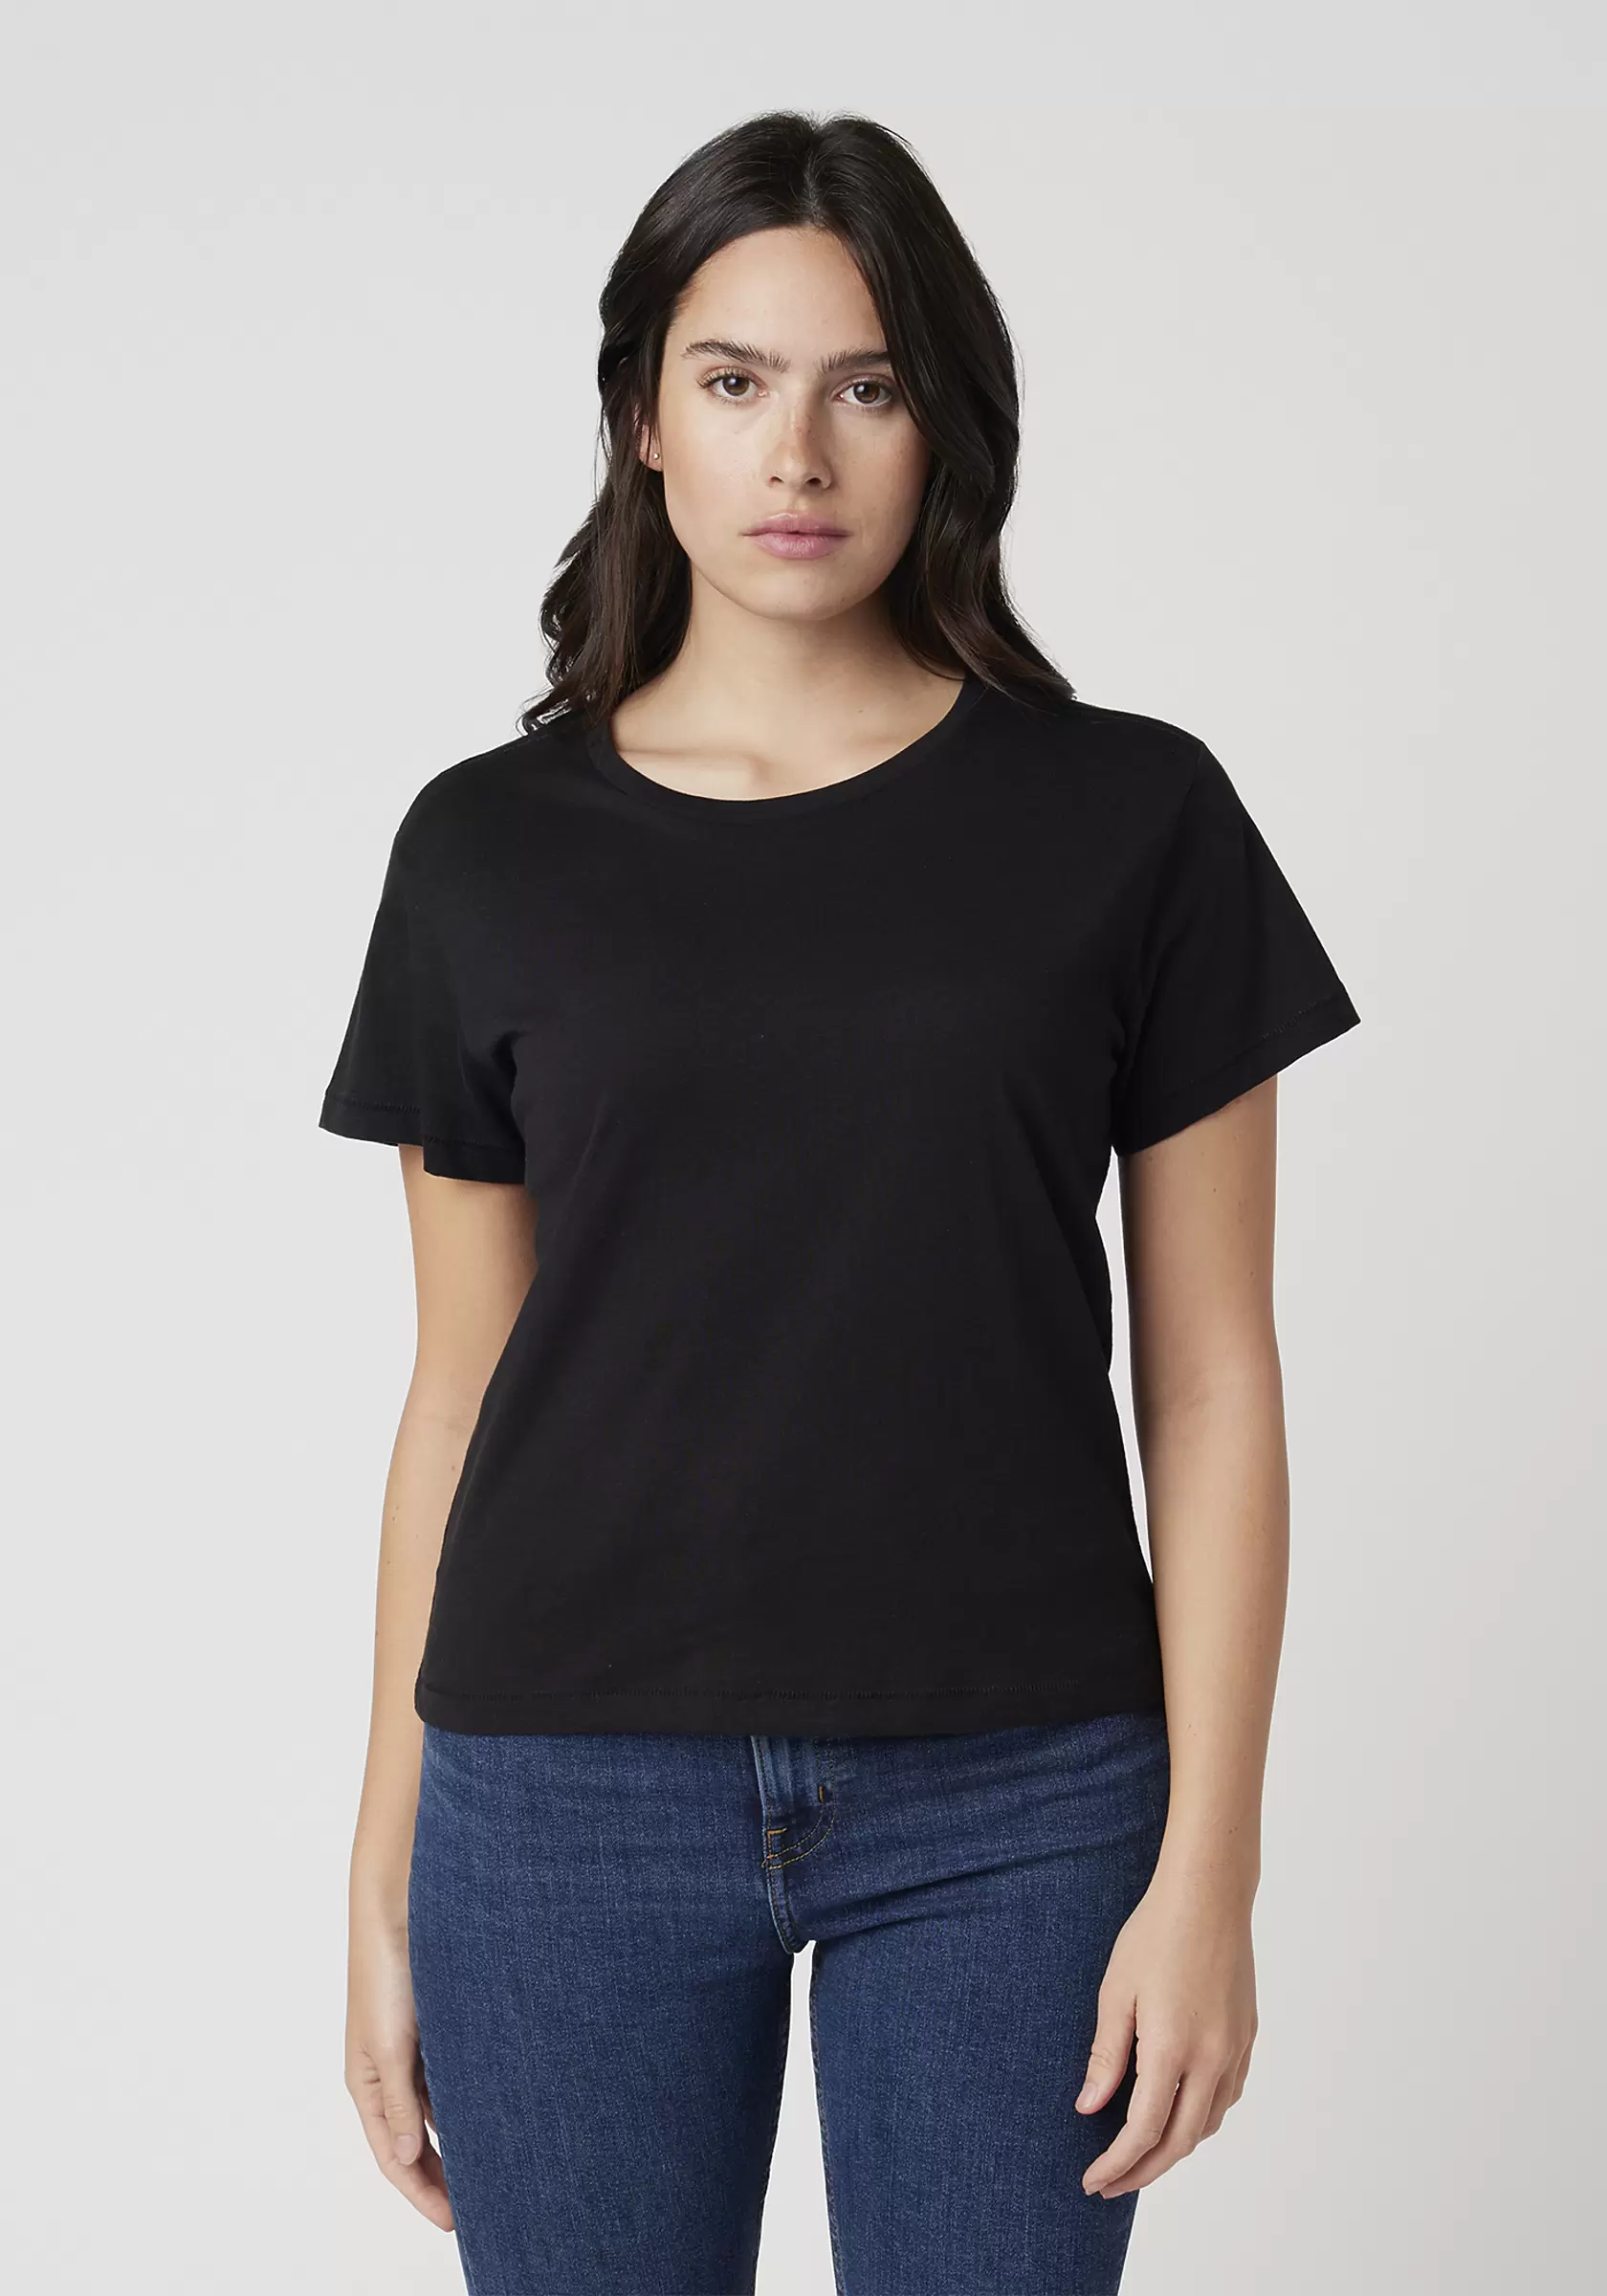 Cotton Heritage OW1086 High-Waisted Crop Tee Black - From $4.57